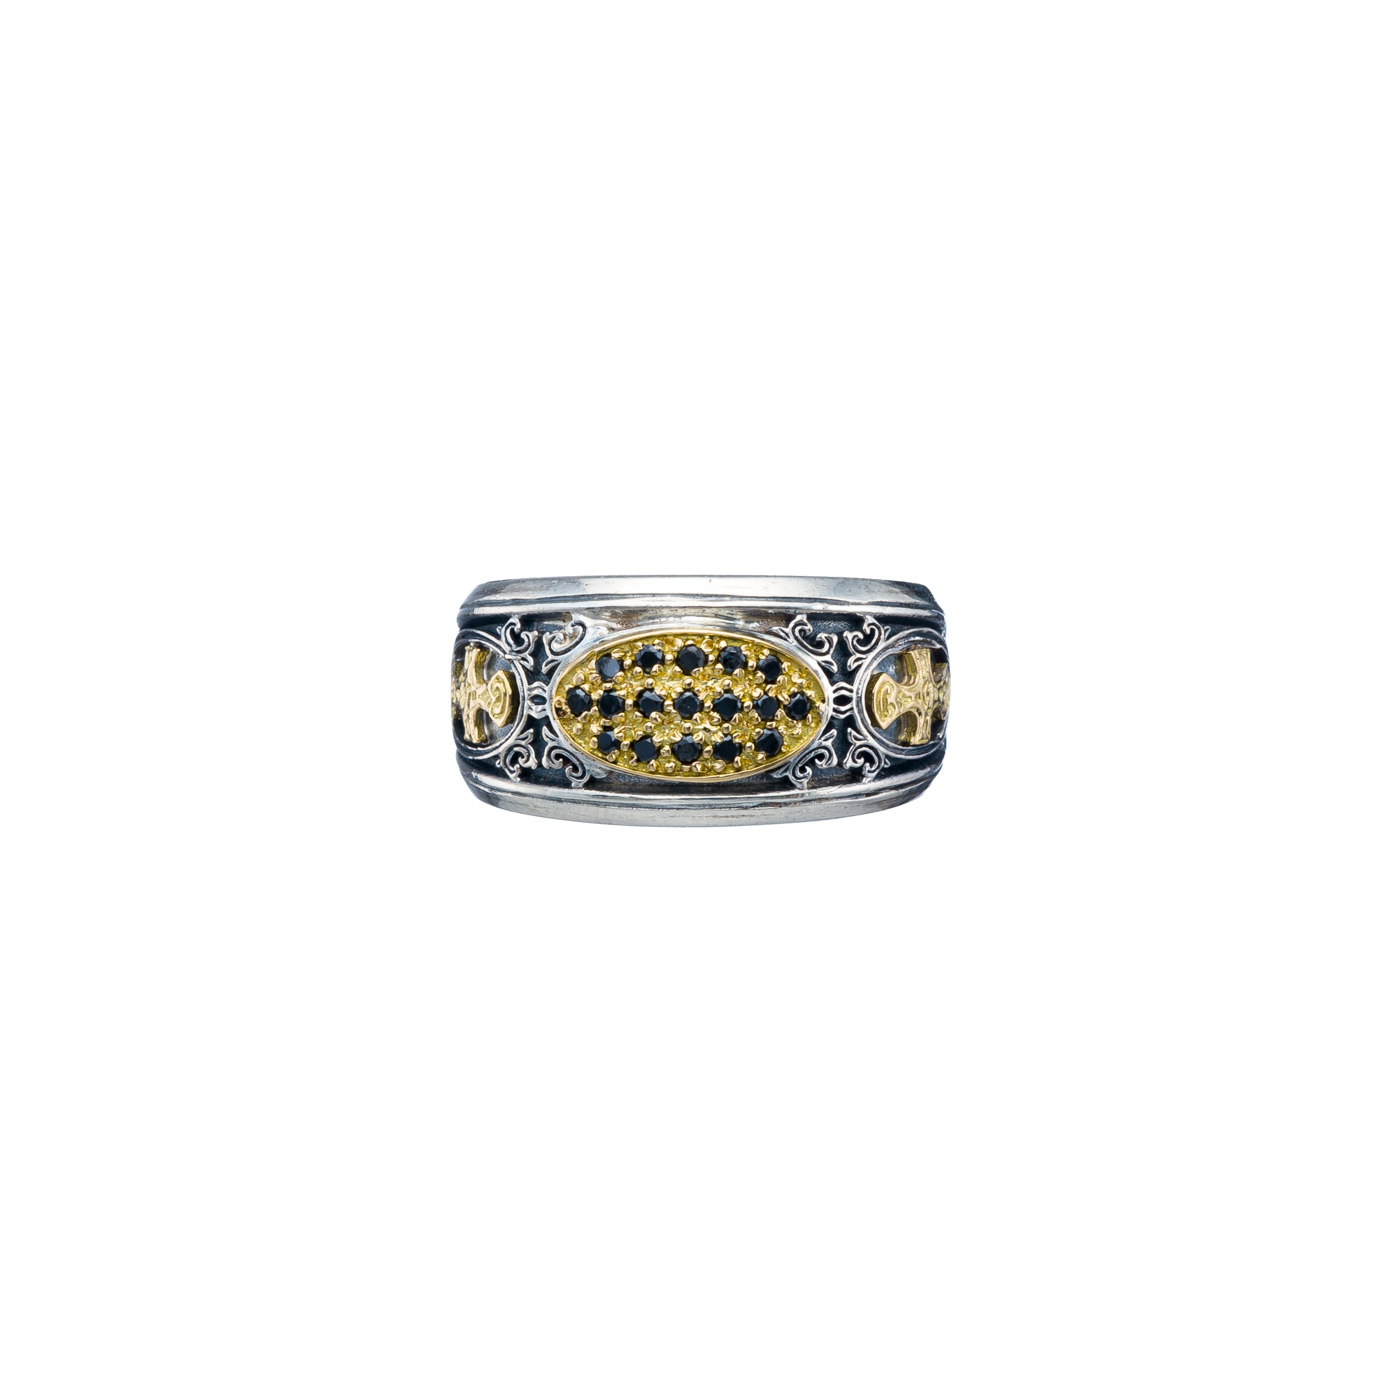 Patmos ring in 18K Gold and Sterling Silver with Black diamonds